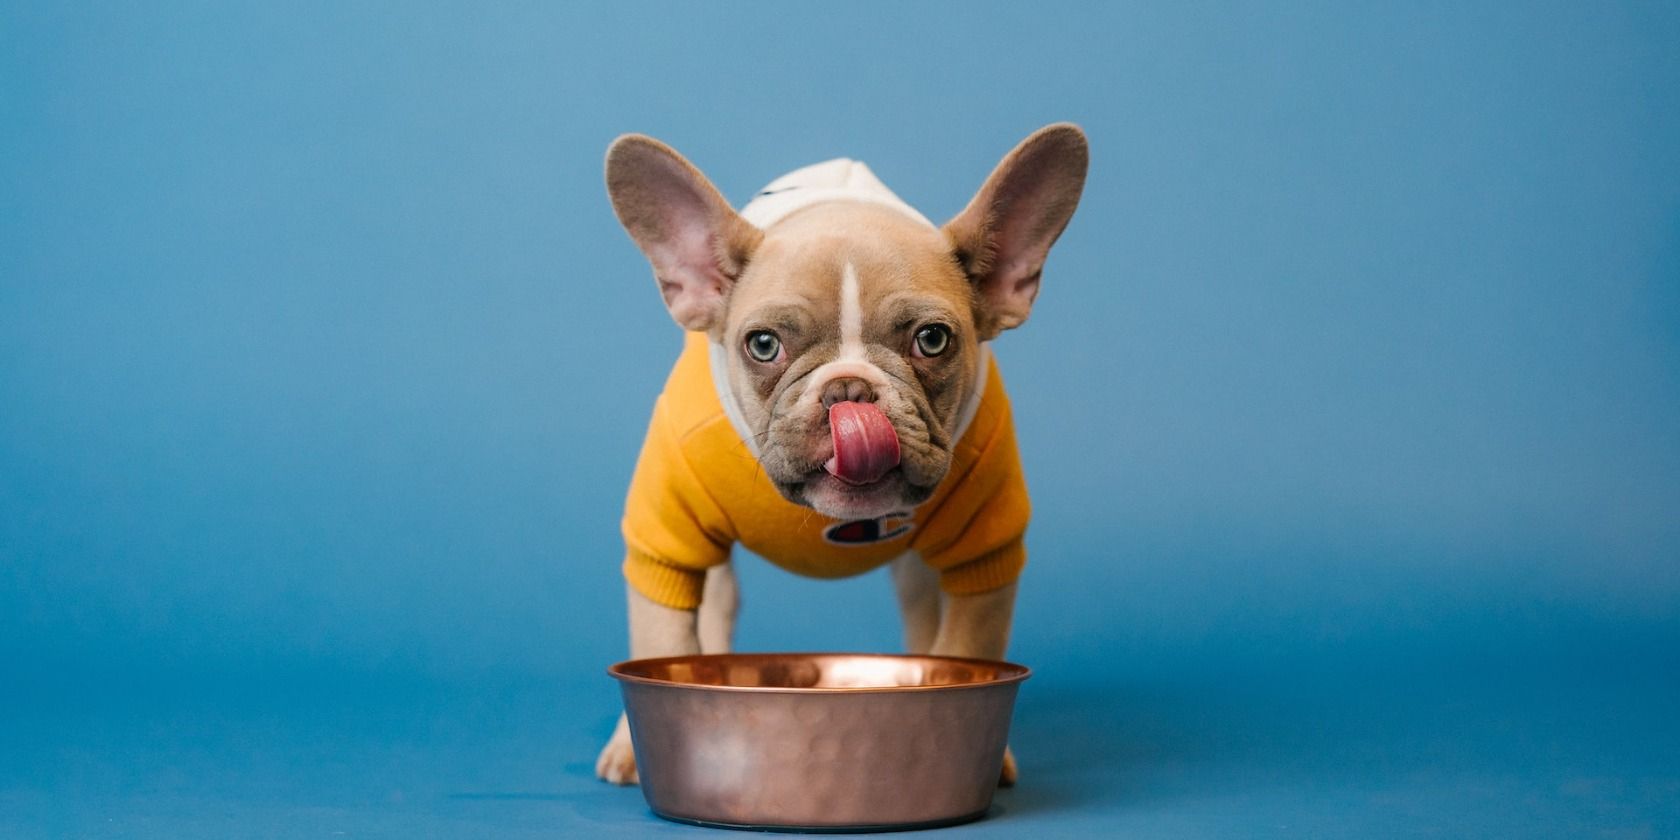 A dog licking its lips in front of food